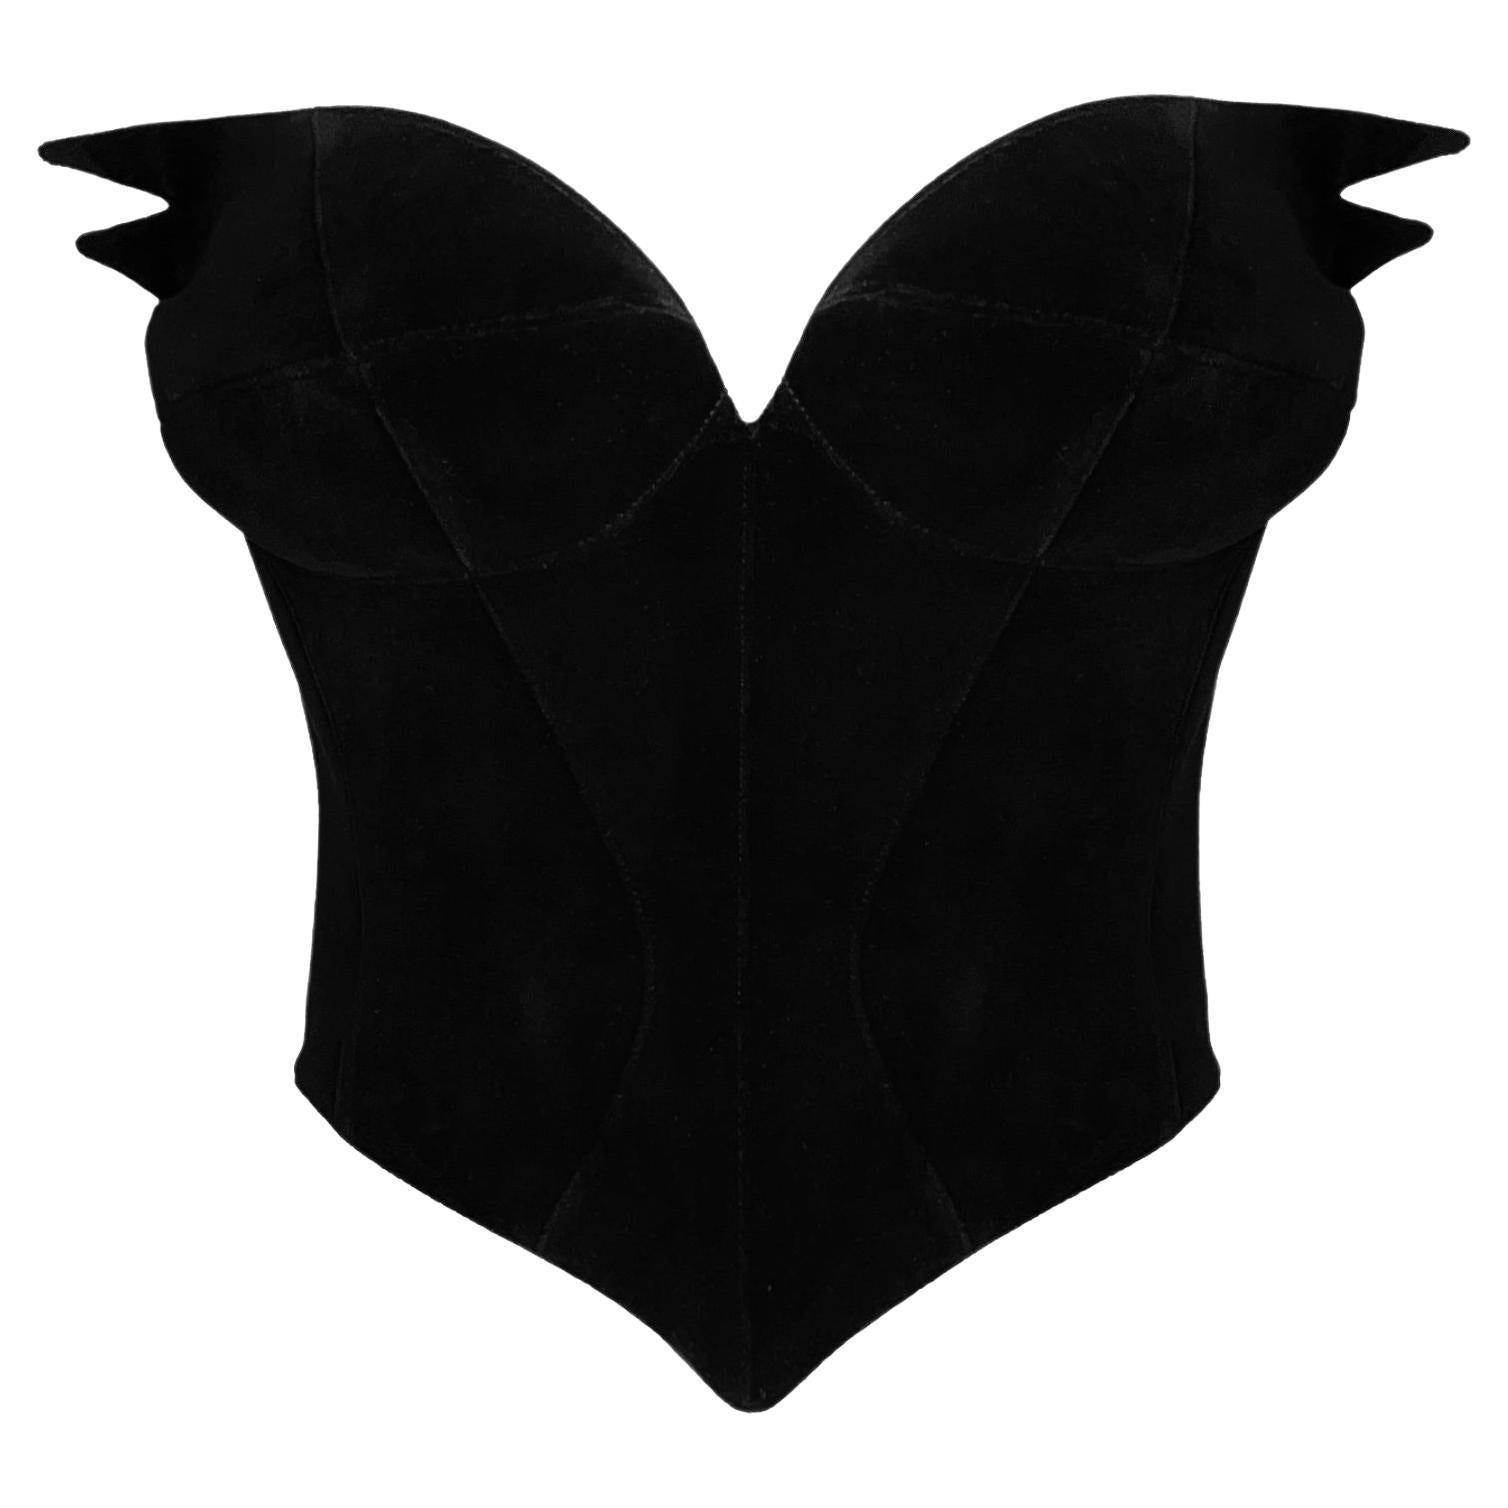 Iconic Thierry Mugler Black Velvet Bustier Top Dramatic Winged Corset For Sale